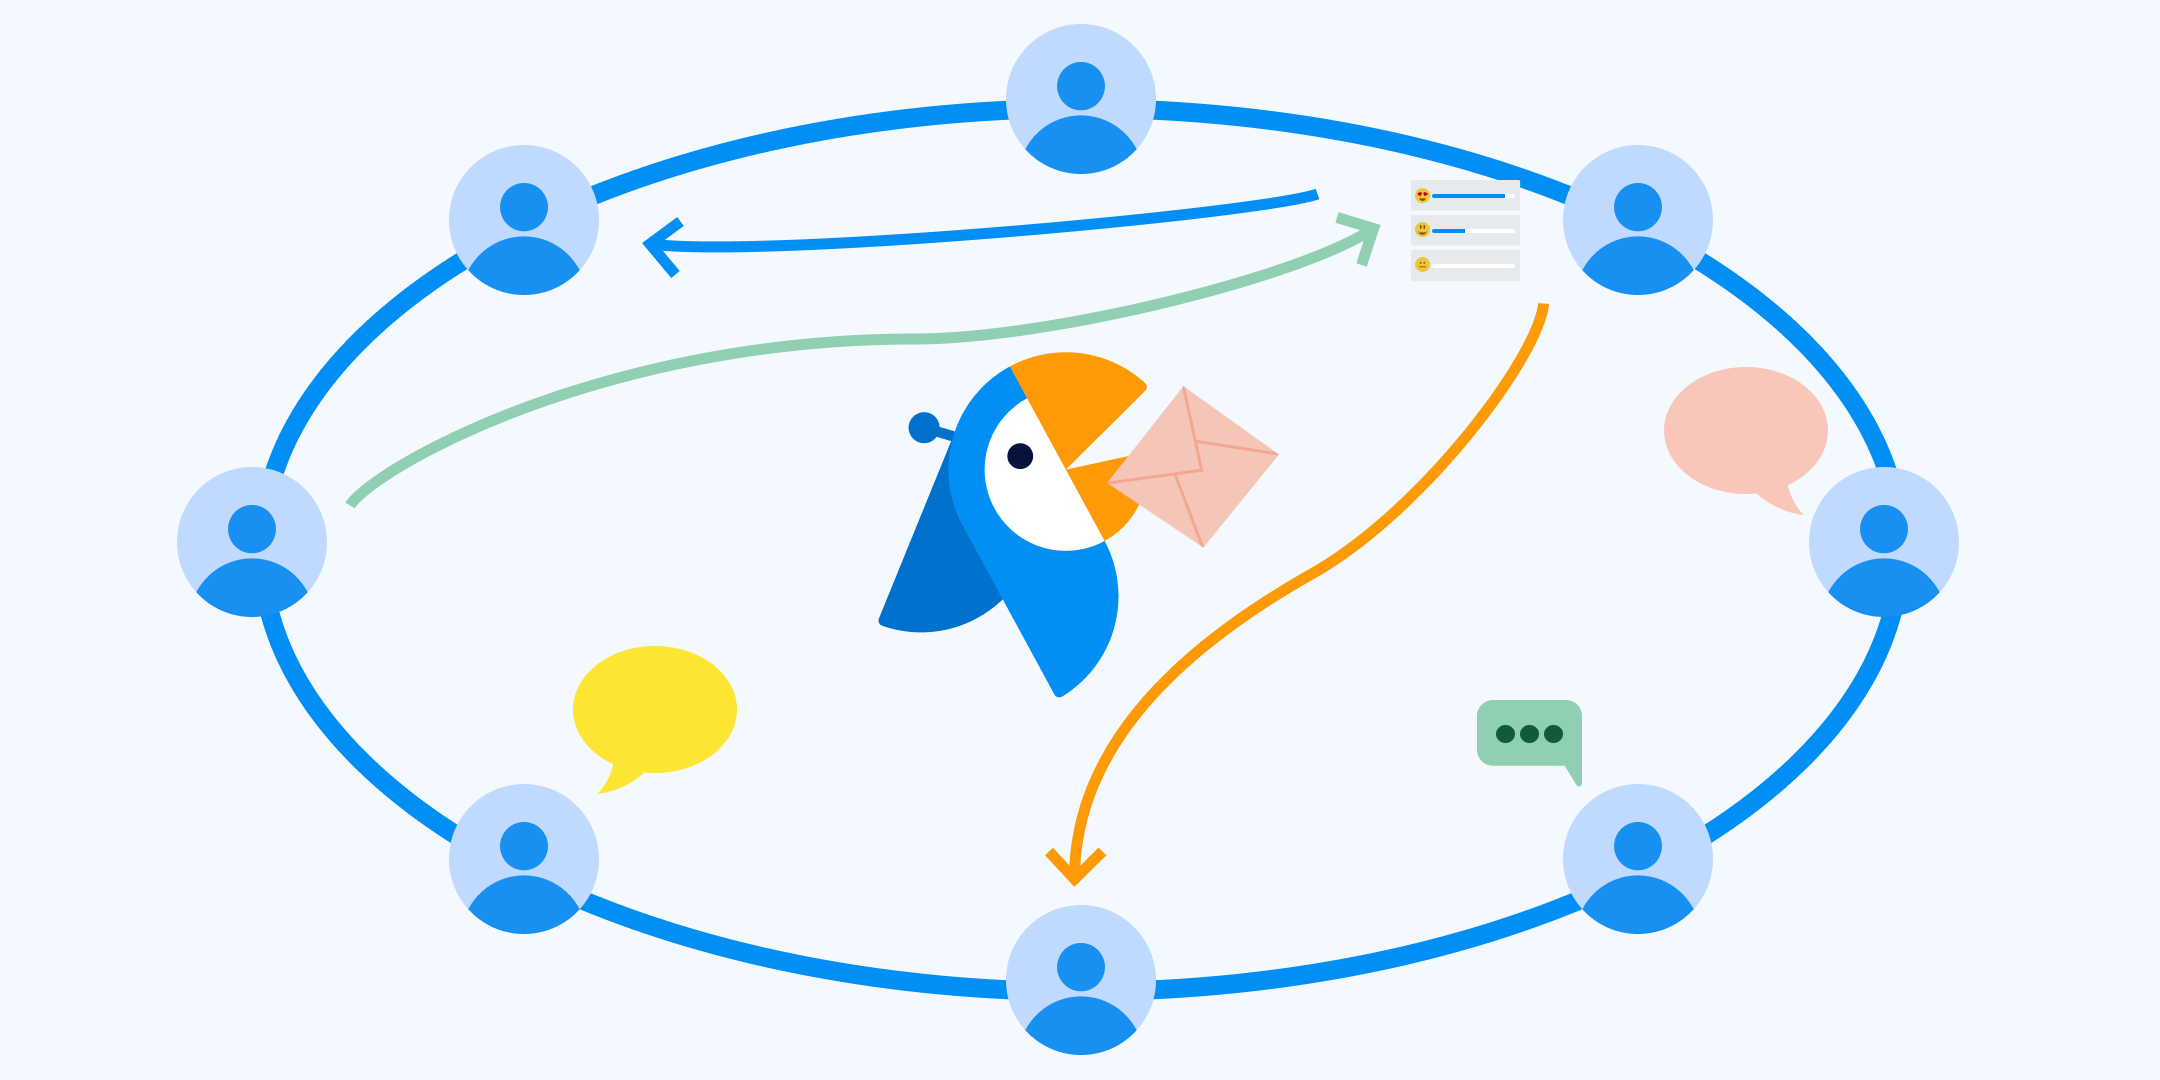 Internal communications: illustration of employees connecting with each other